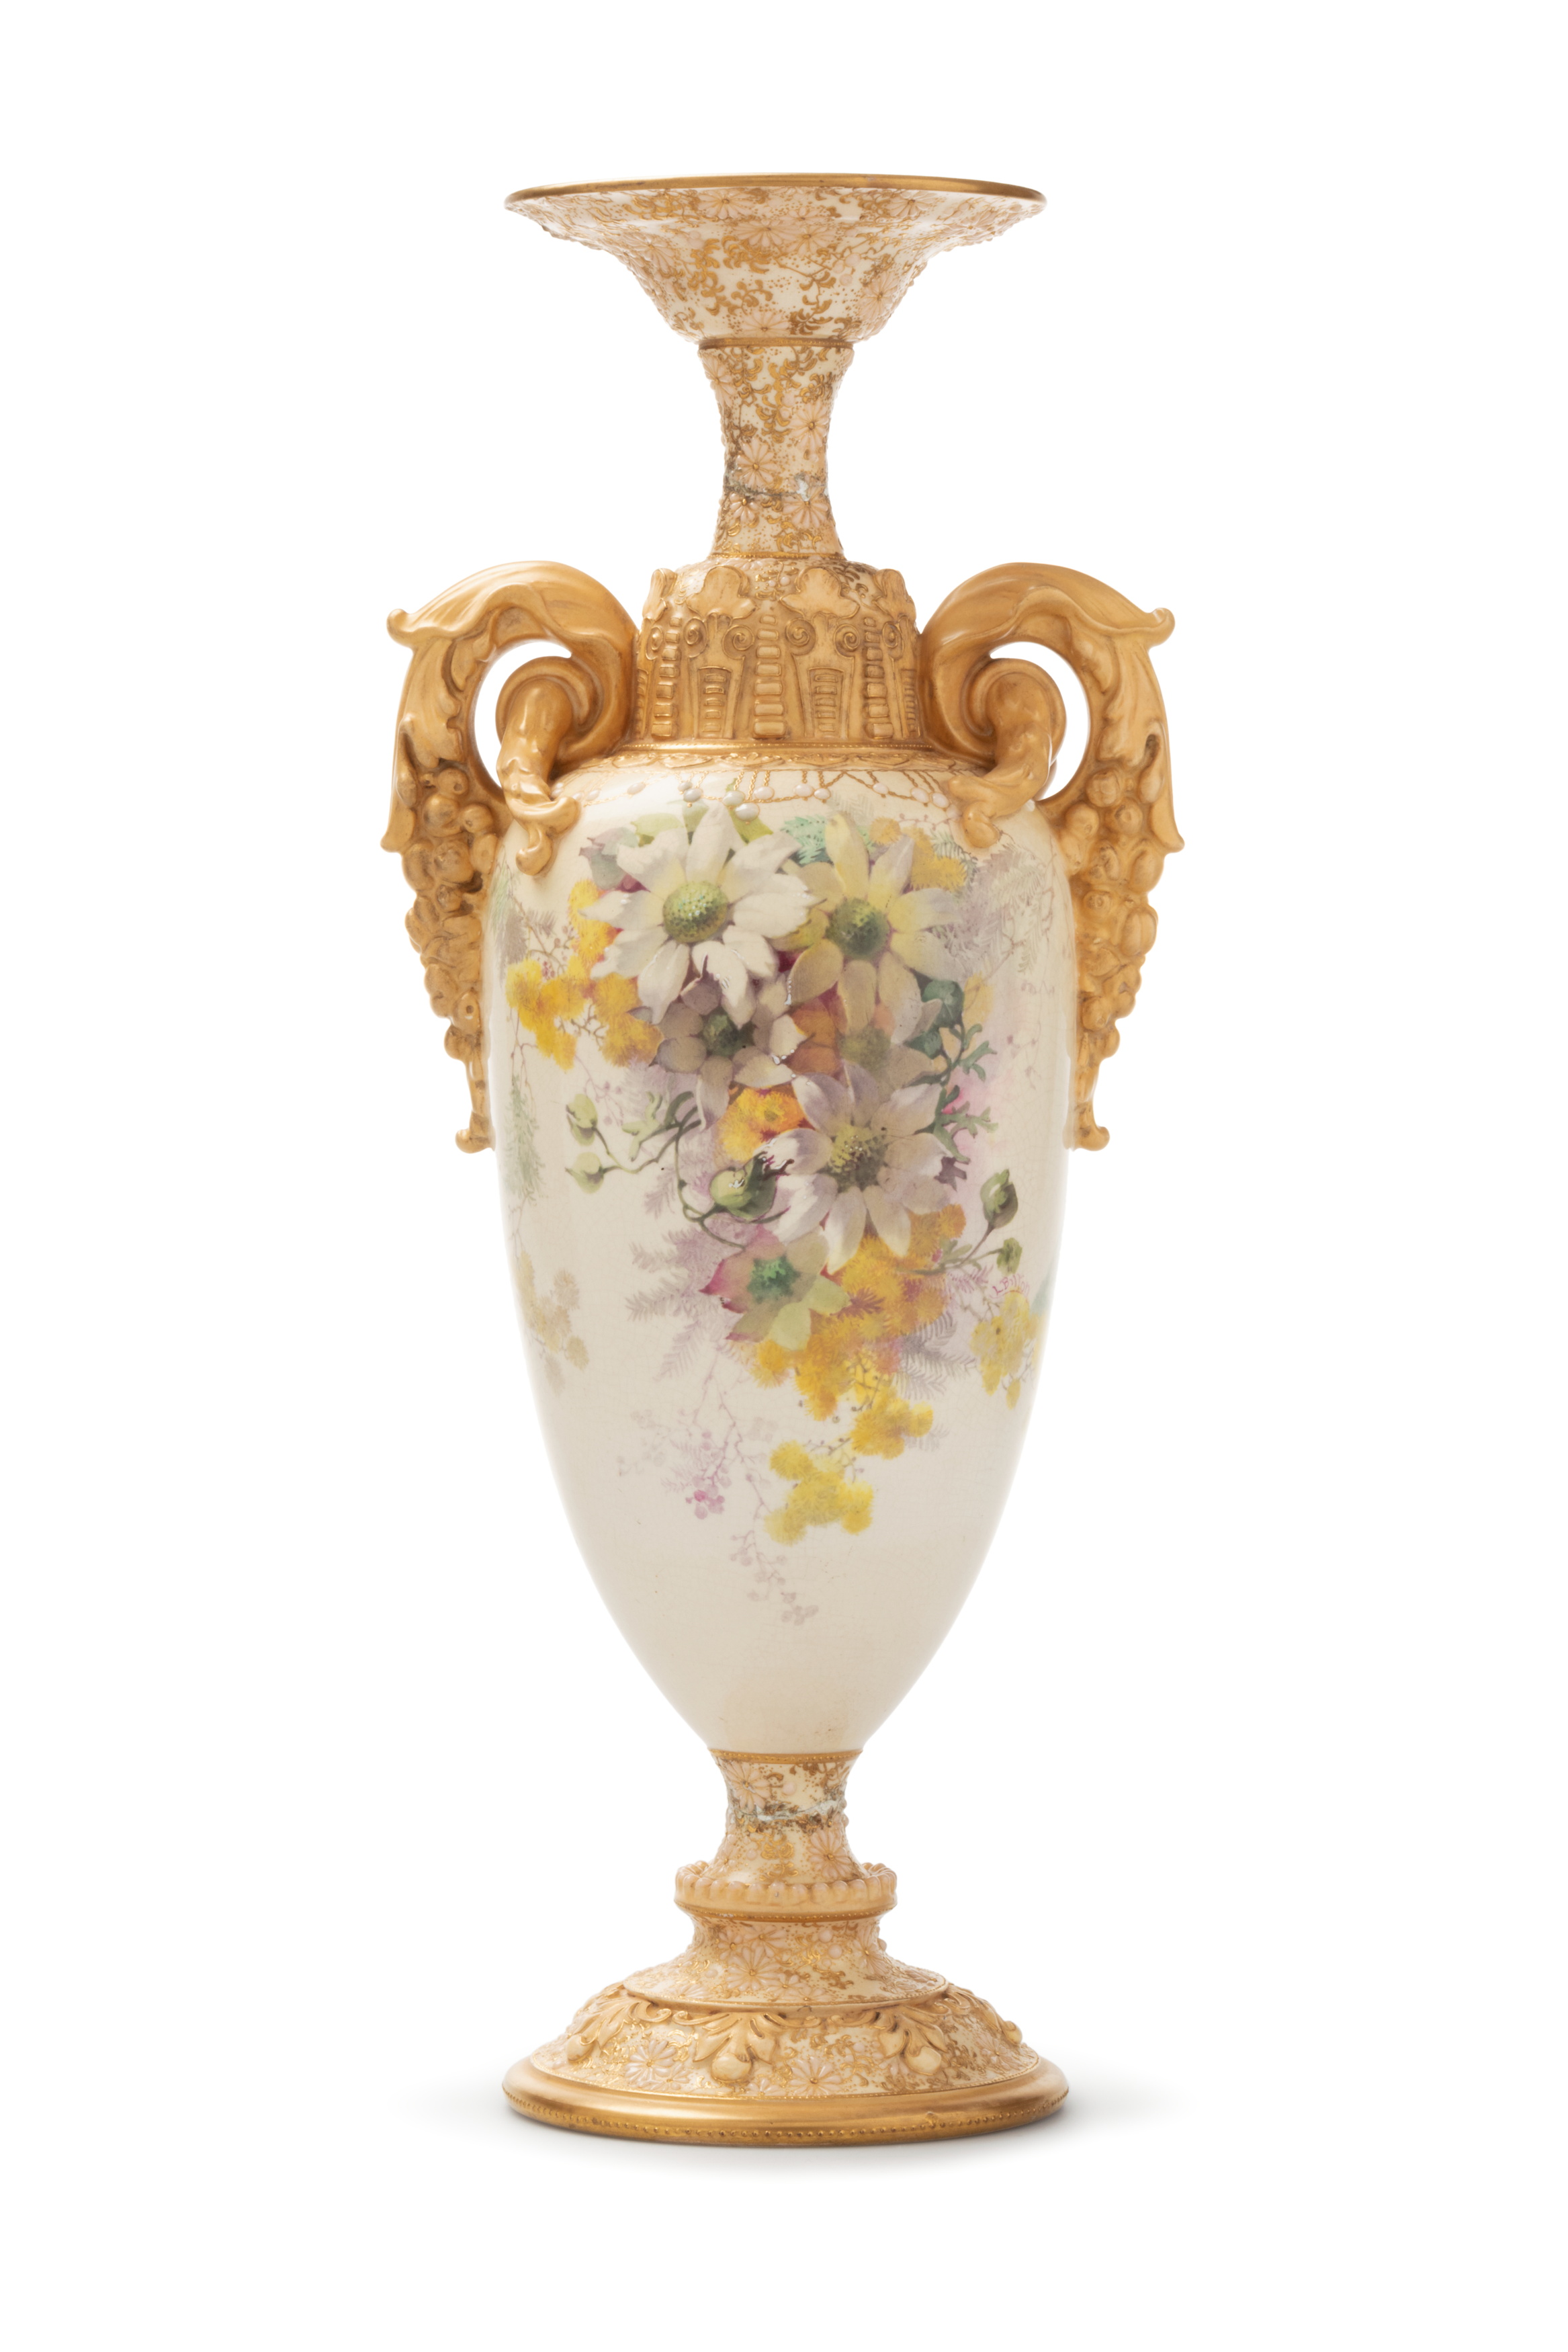 Vase by Royal Doulton for the World's Columbian Exposition